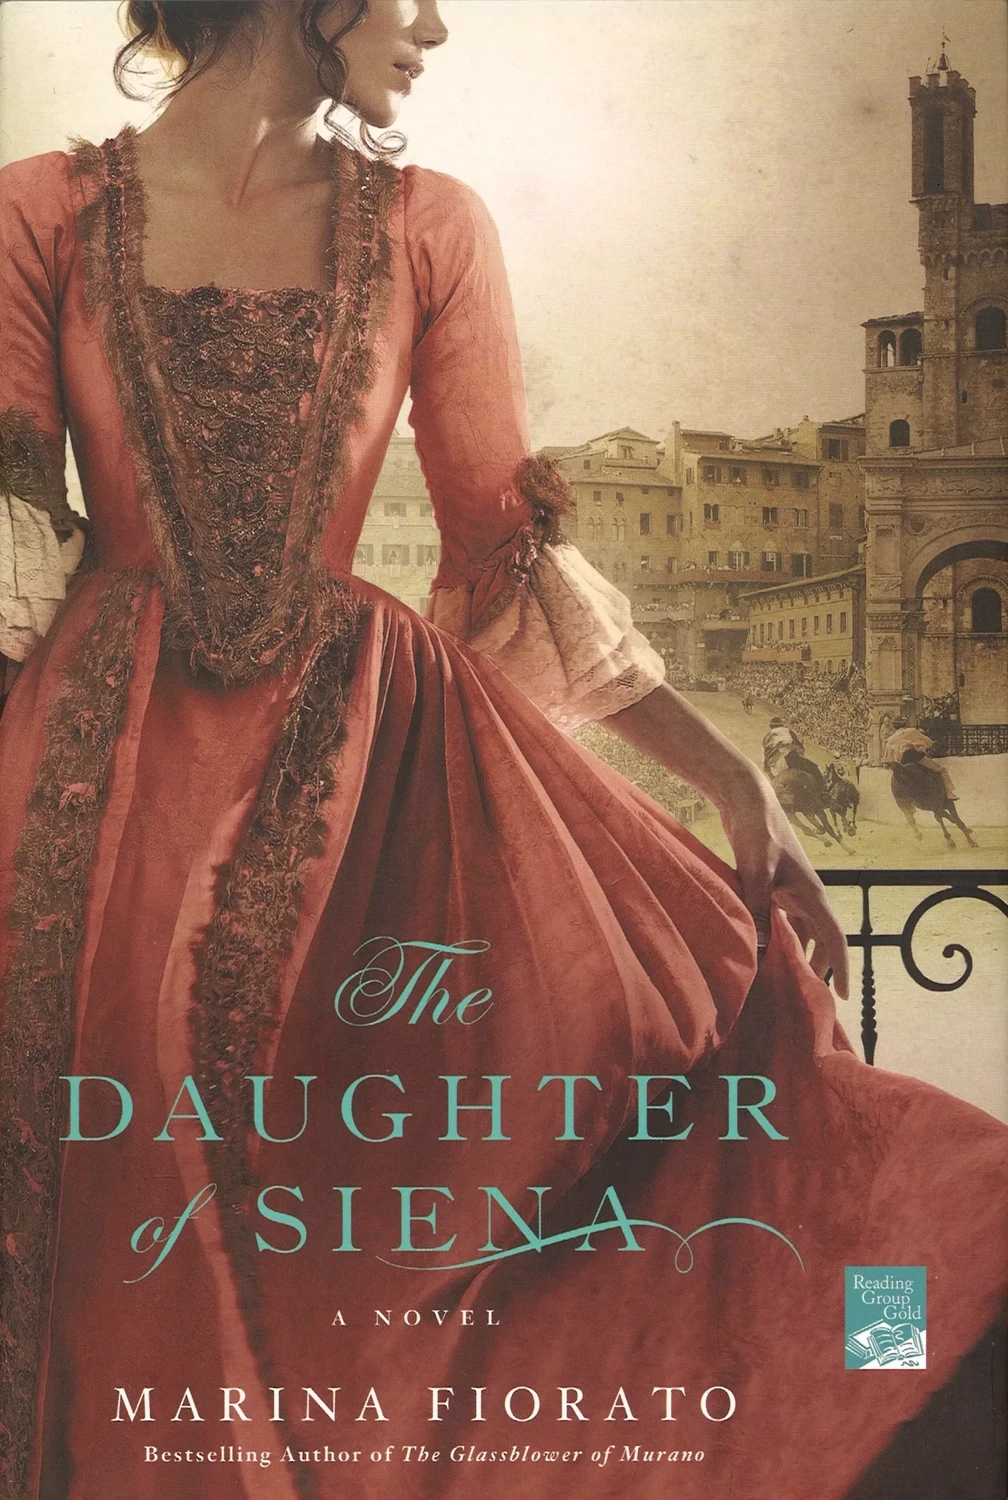 The Daughter of Siena by Marina Fiorato